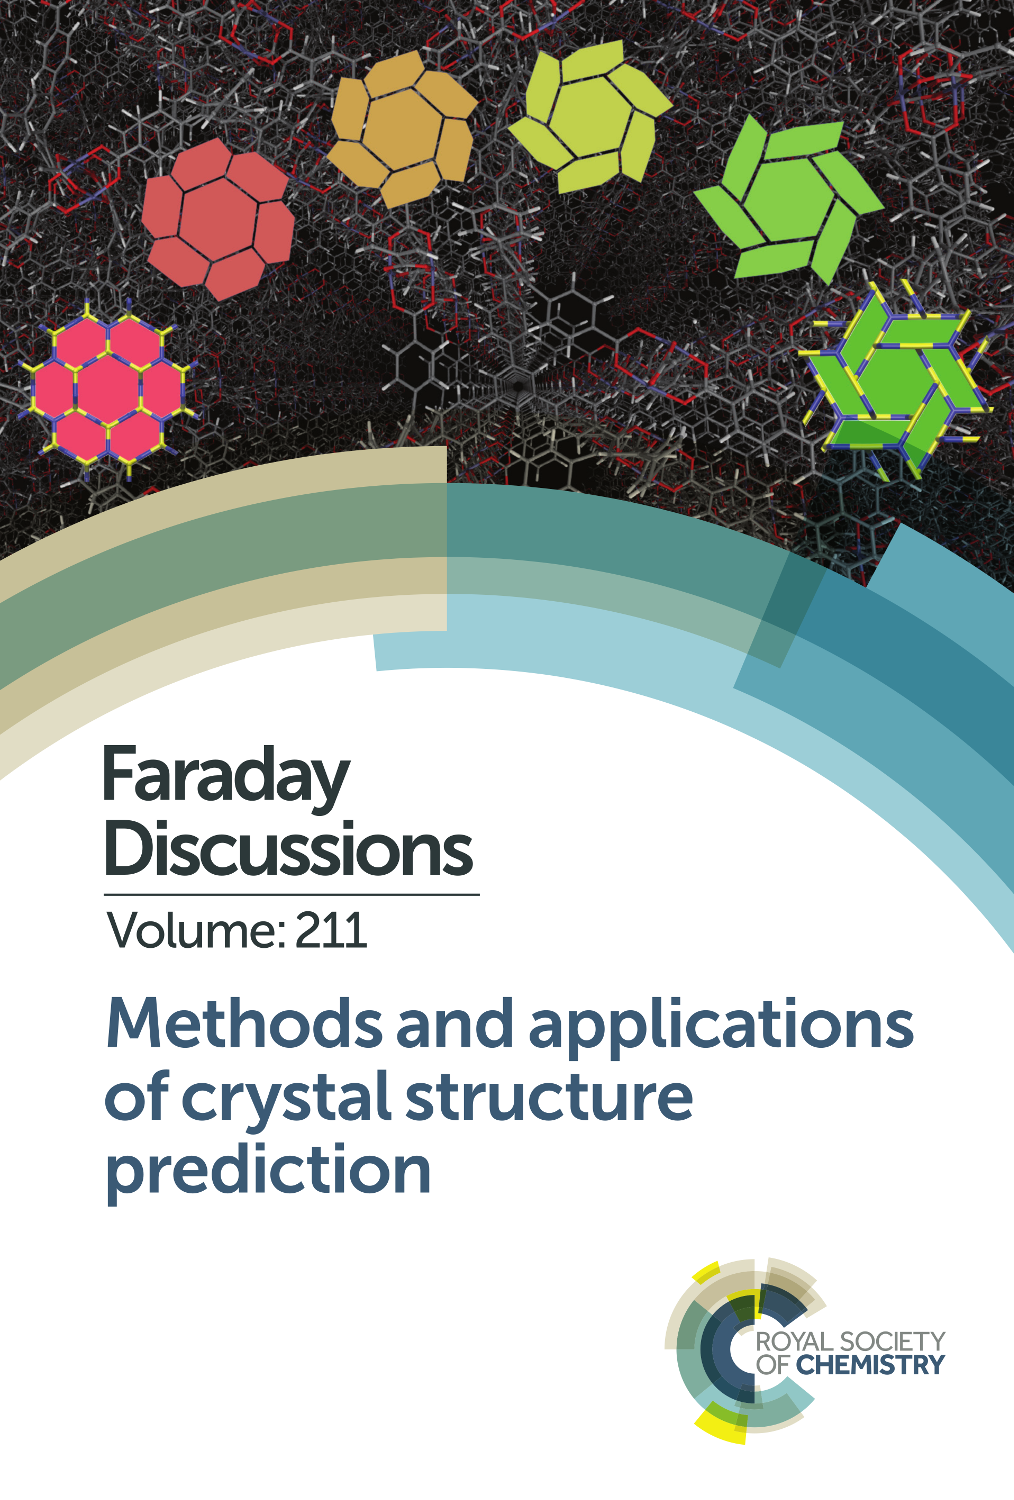 Faraday Discussion: Crystal structure prediction